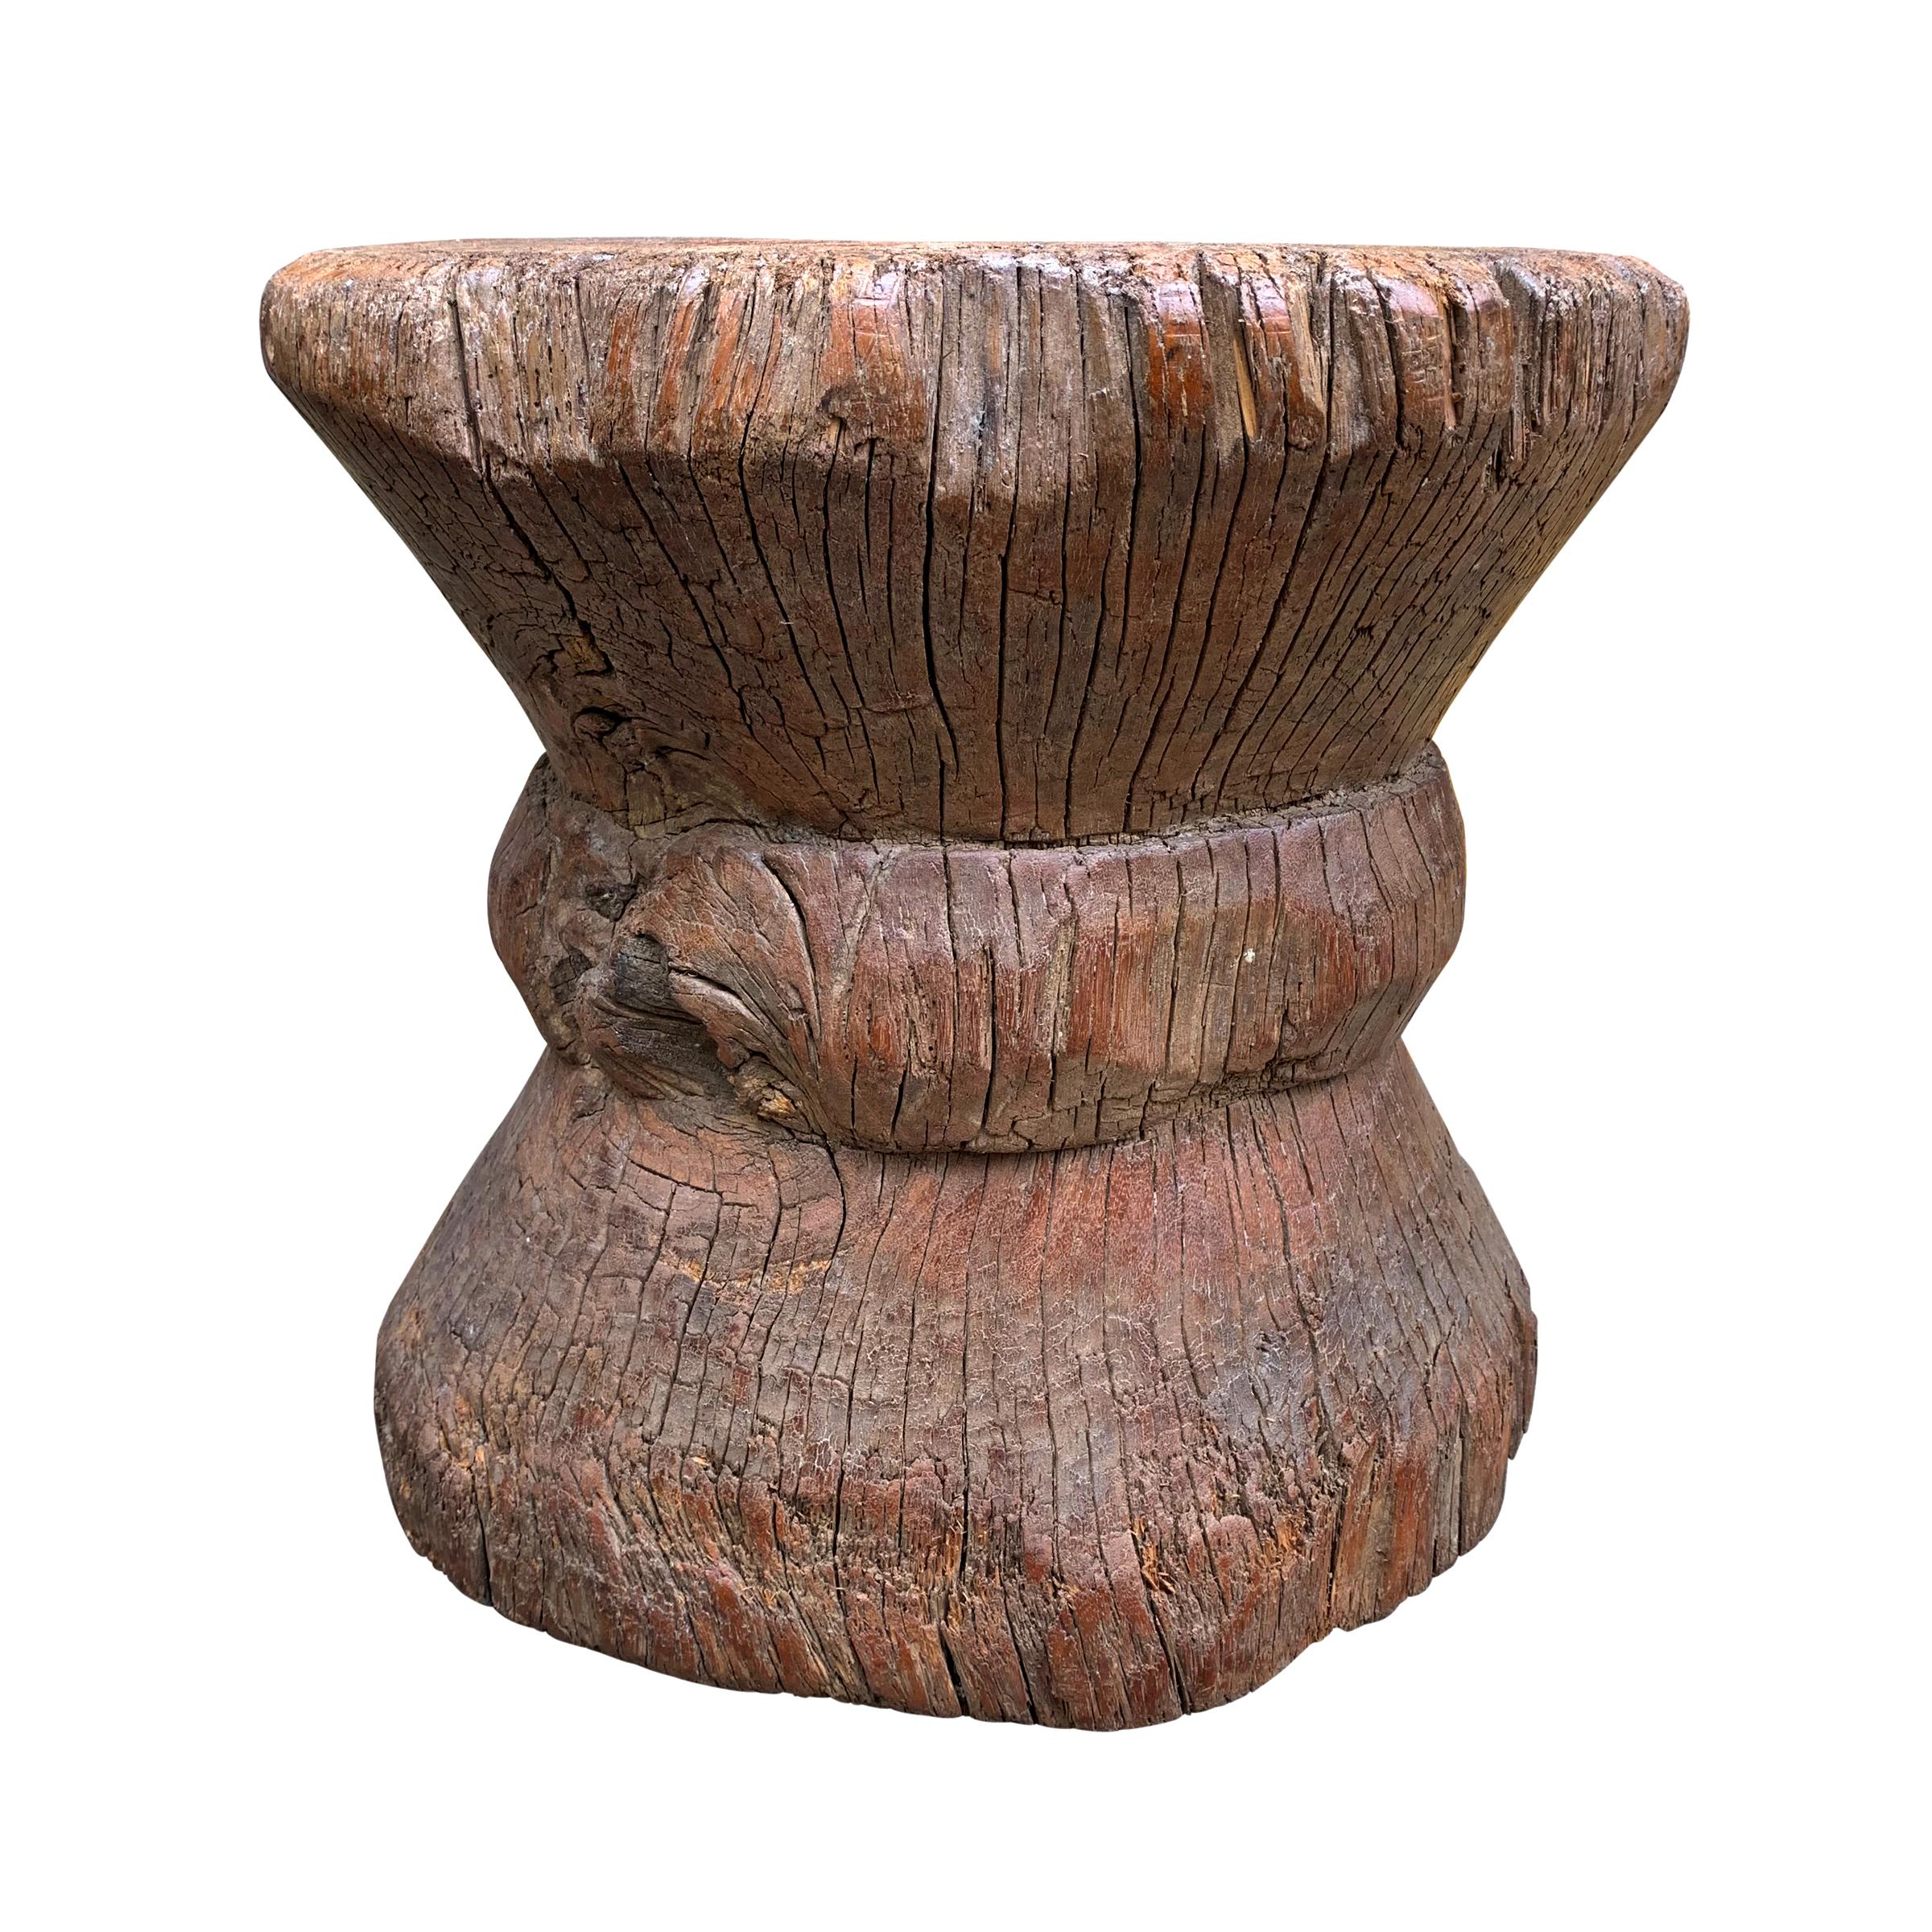 carved wooden stool